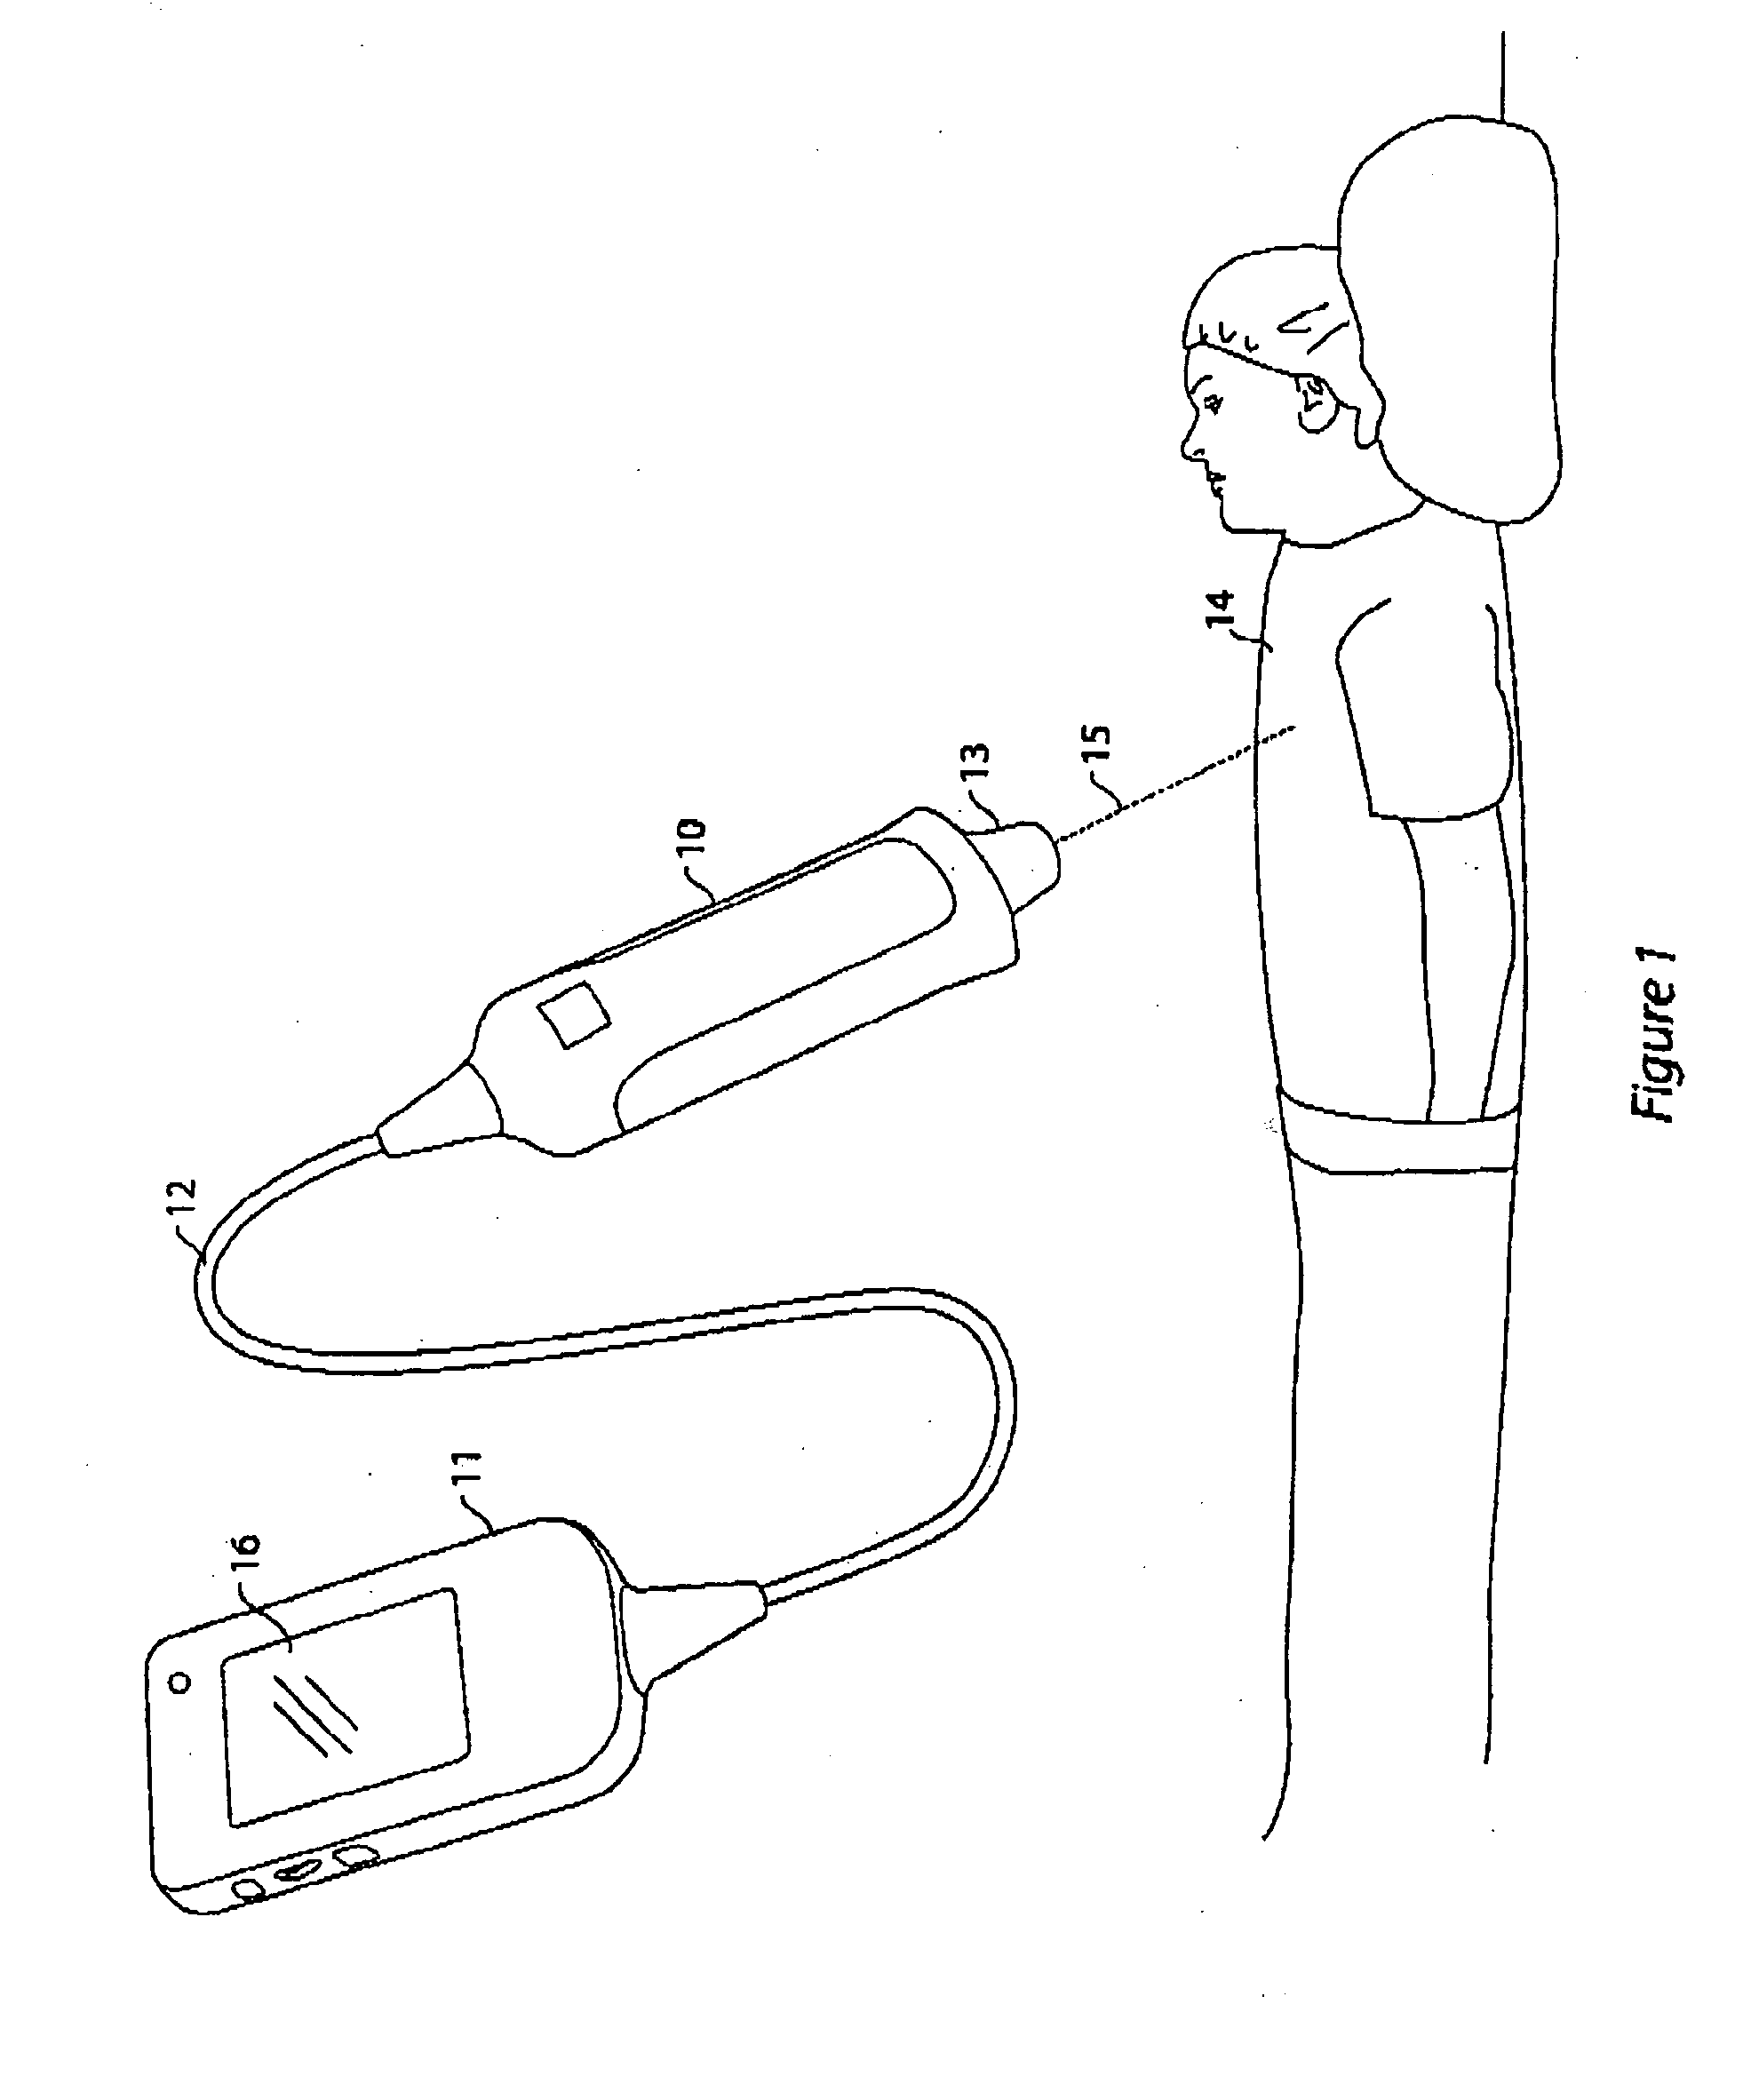 Apparatus and method for medical scanning